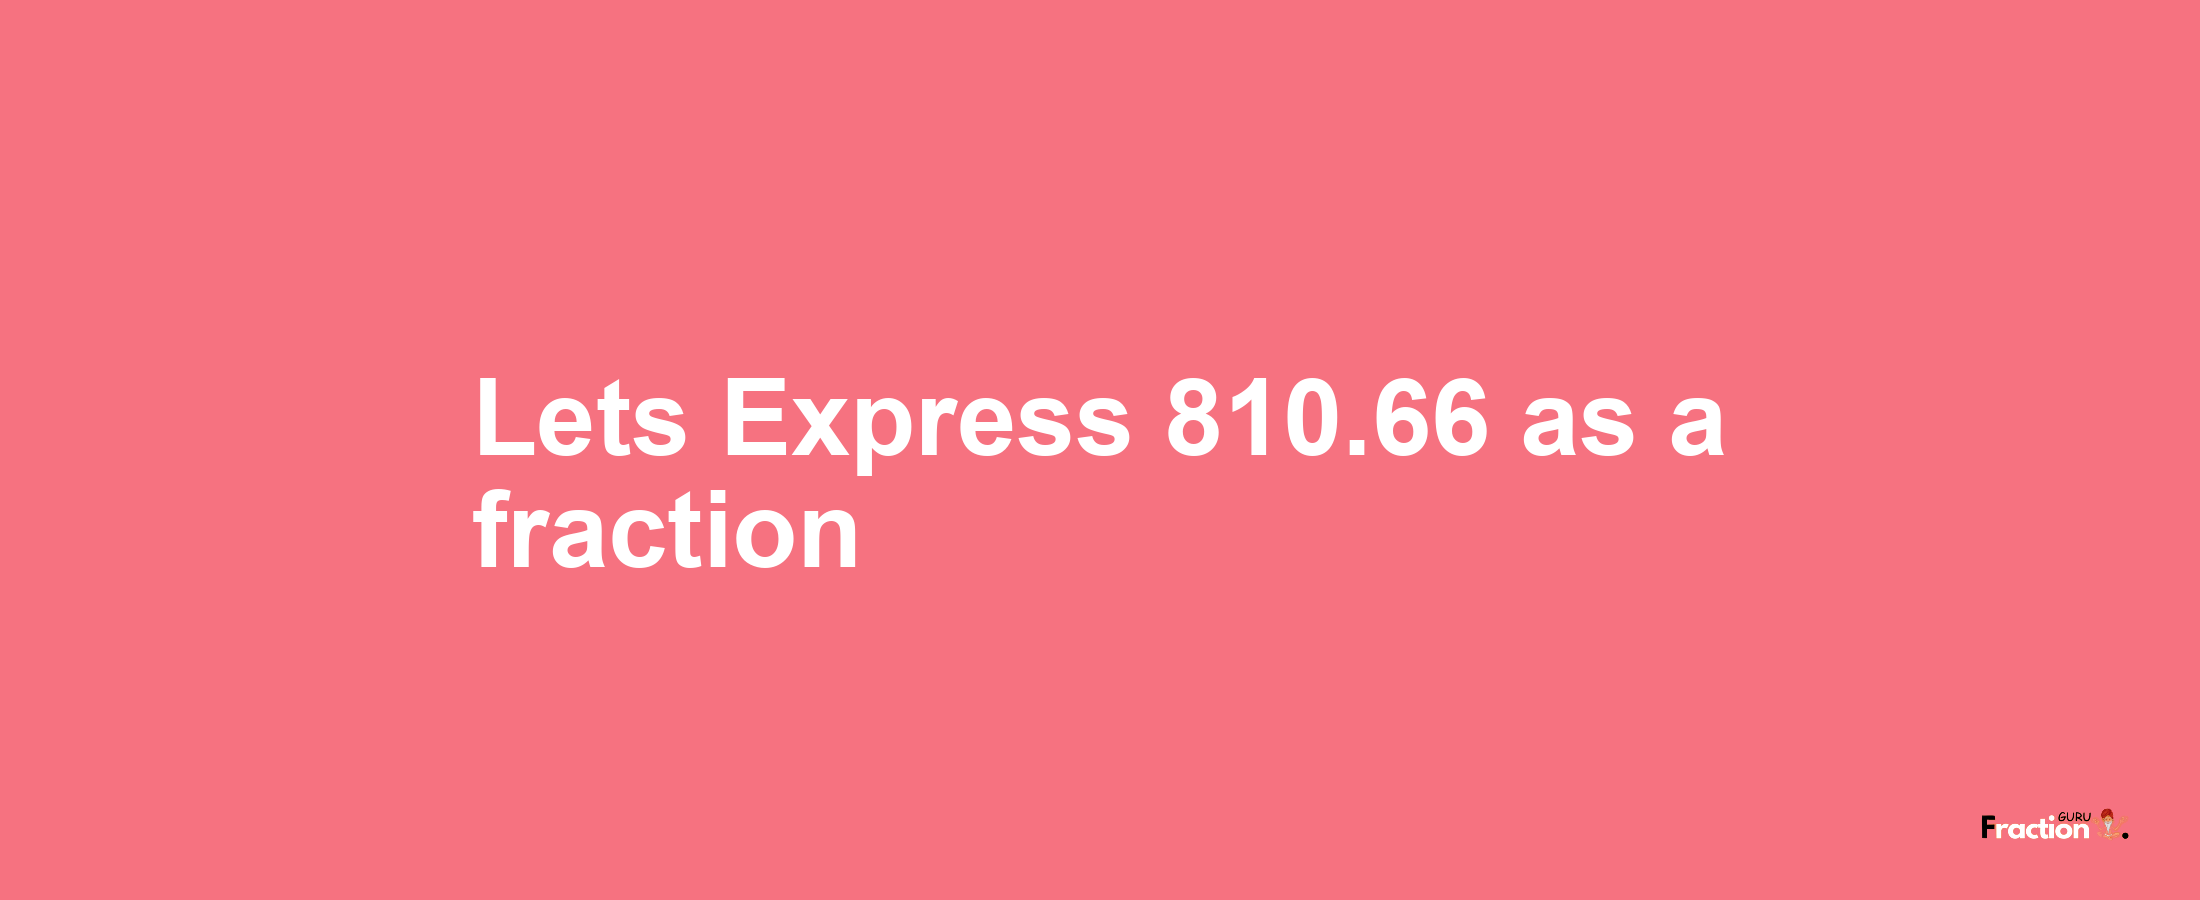 Lets Express 810.66 as afraction